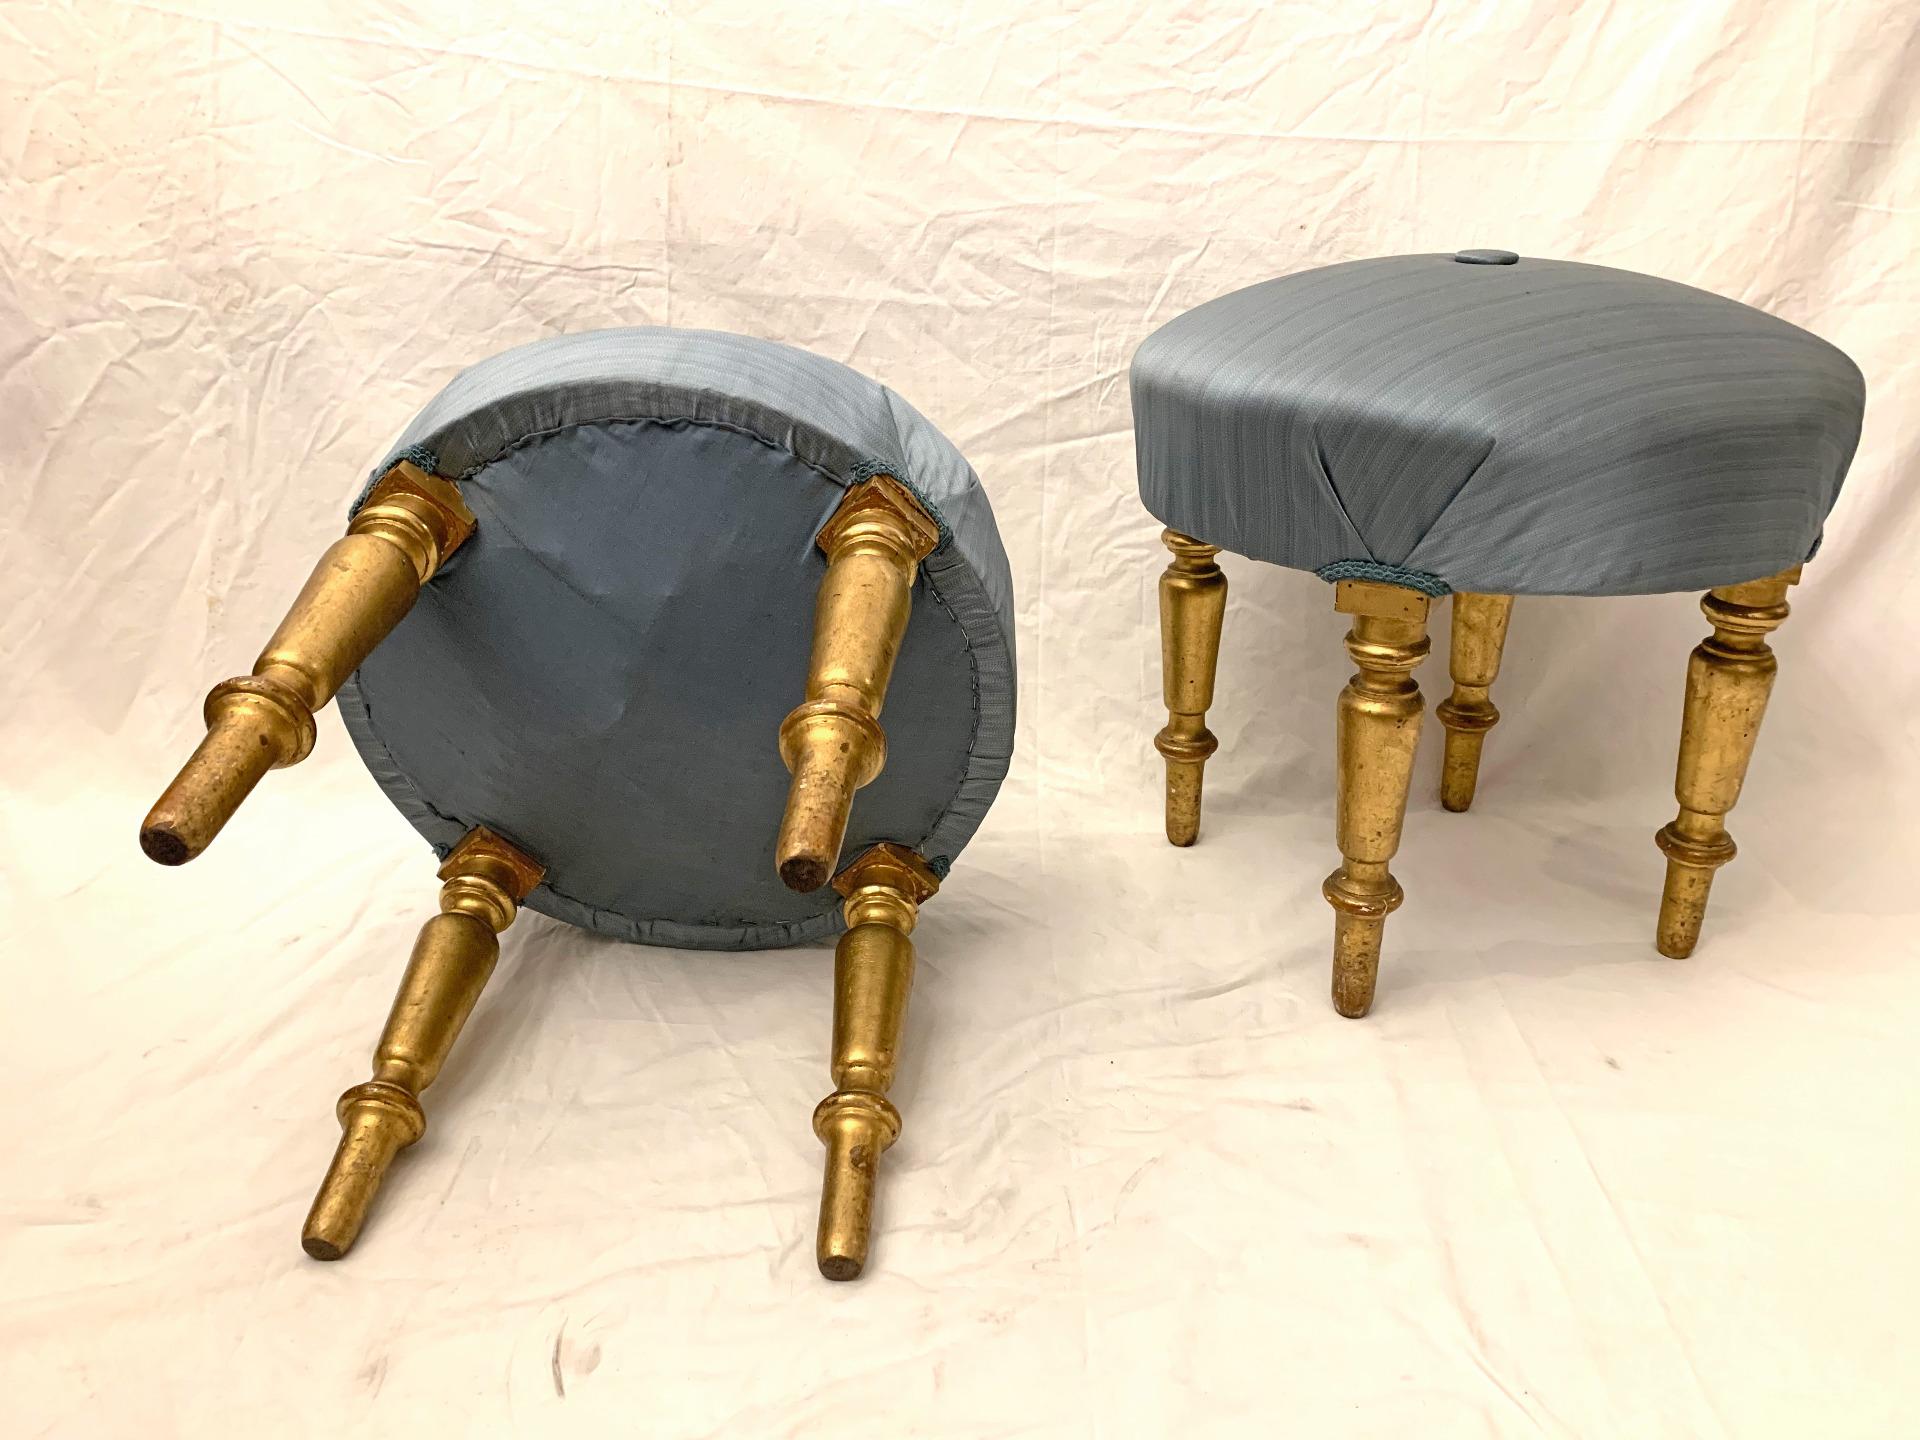 Gilt SECOND HALF OF THE 19th CENTURY PAIR OF GOLDEN BENCHES  For Sale